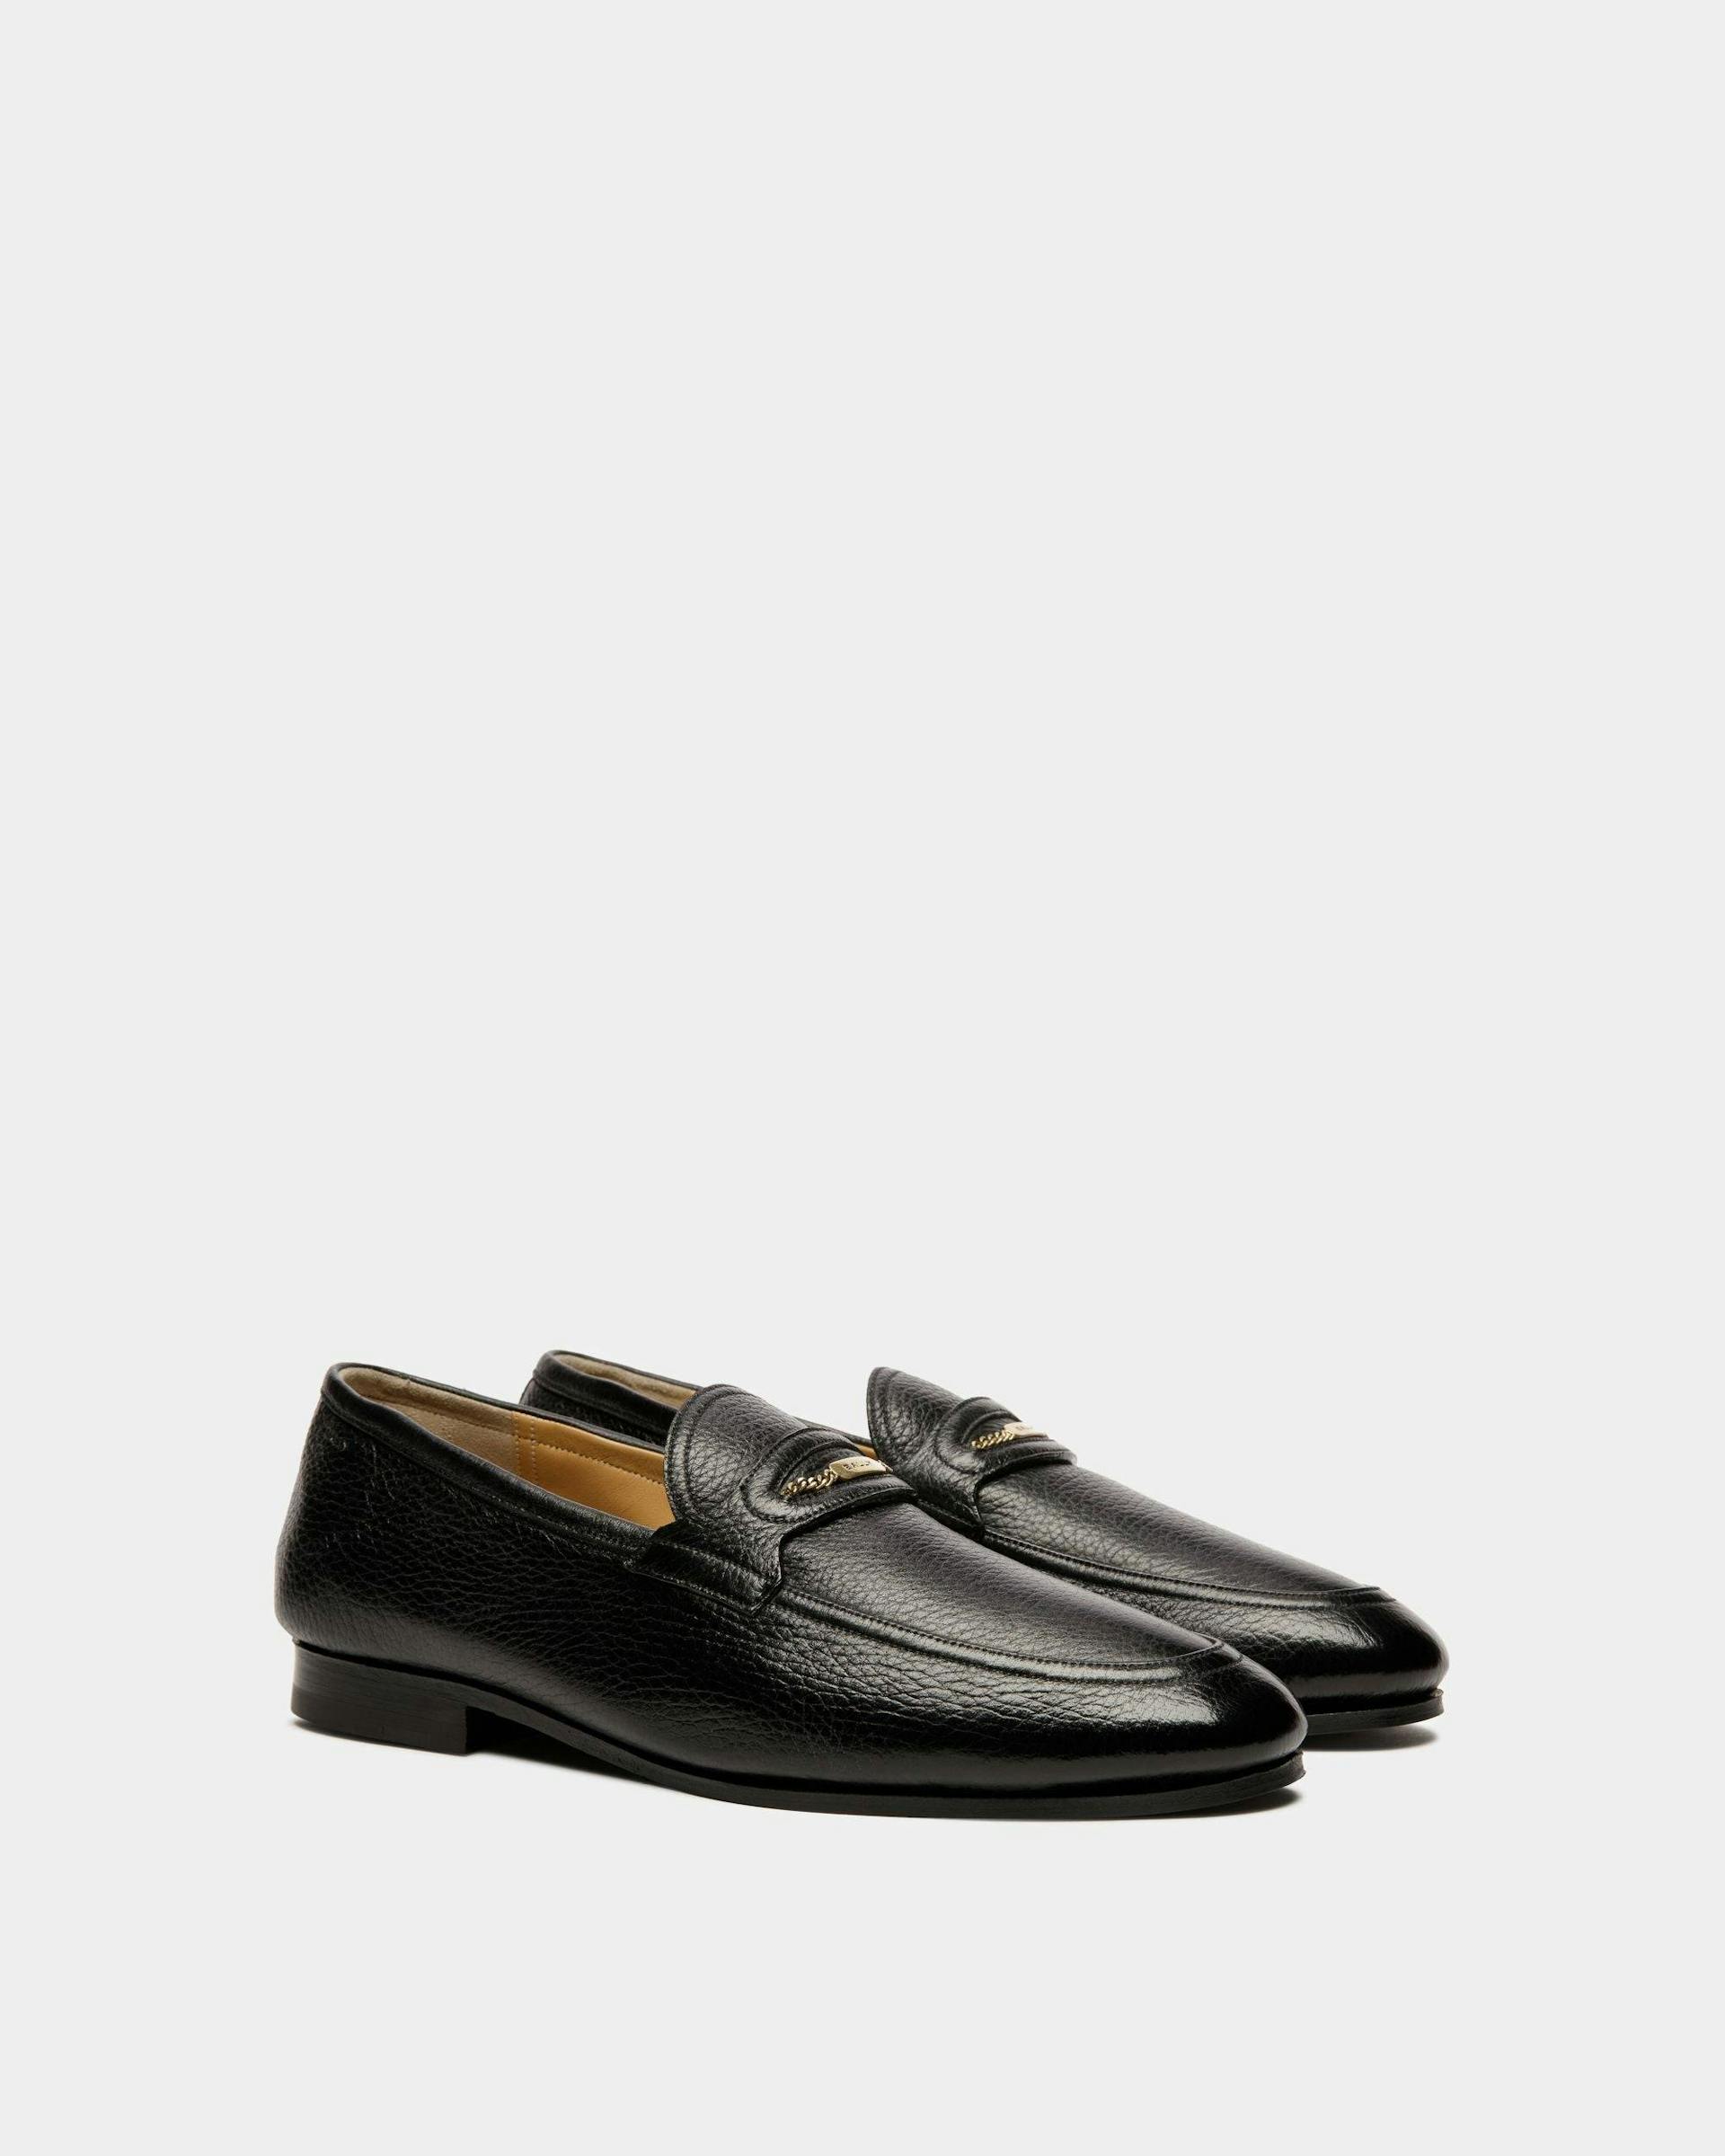 Men's Pesek Loafers In Black Leather | Bally | Still Life 3/4 Front